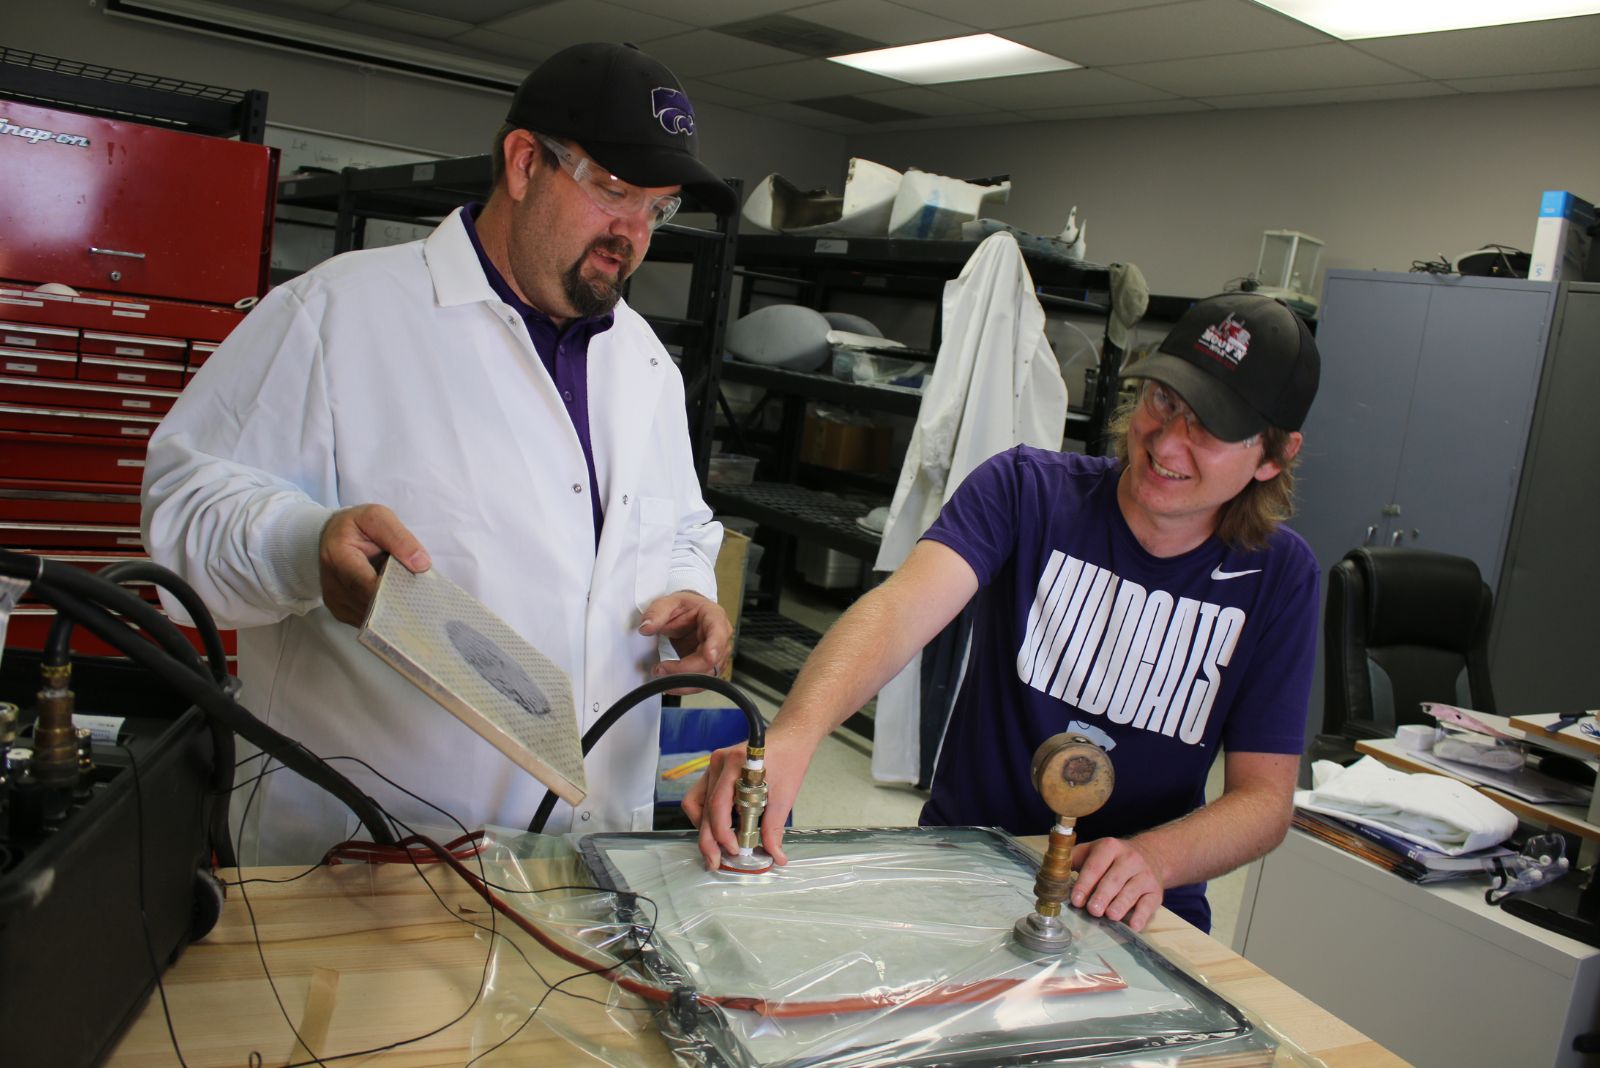 K-State Salina's training in composites allows students and professionals to upskill into an in-demand industry